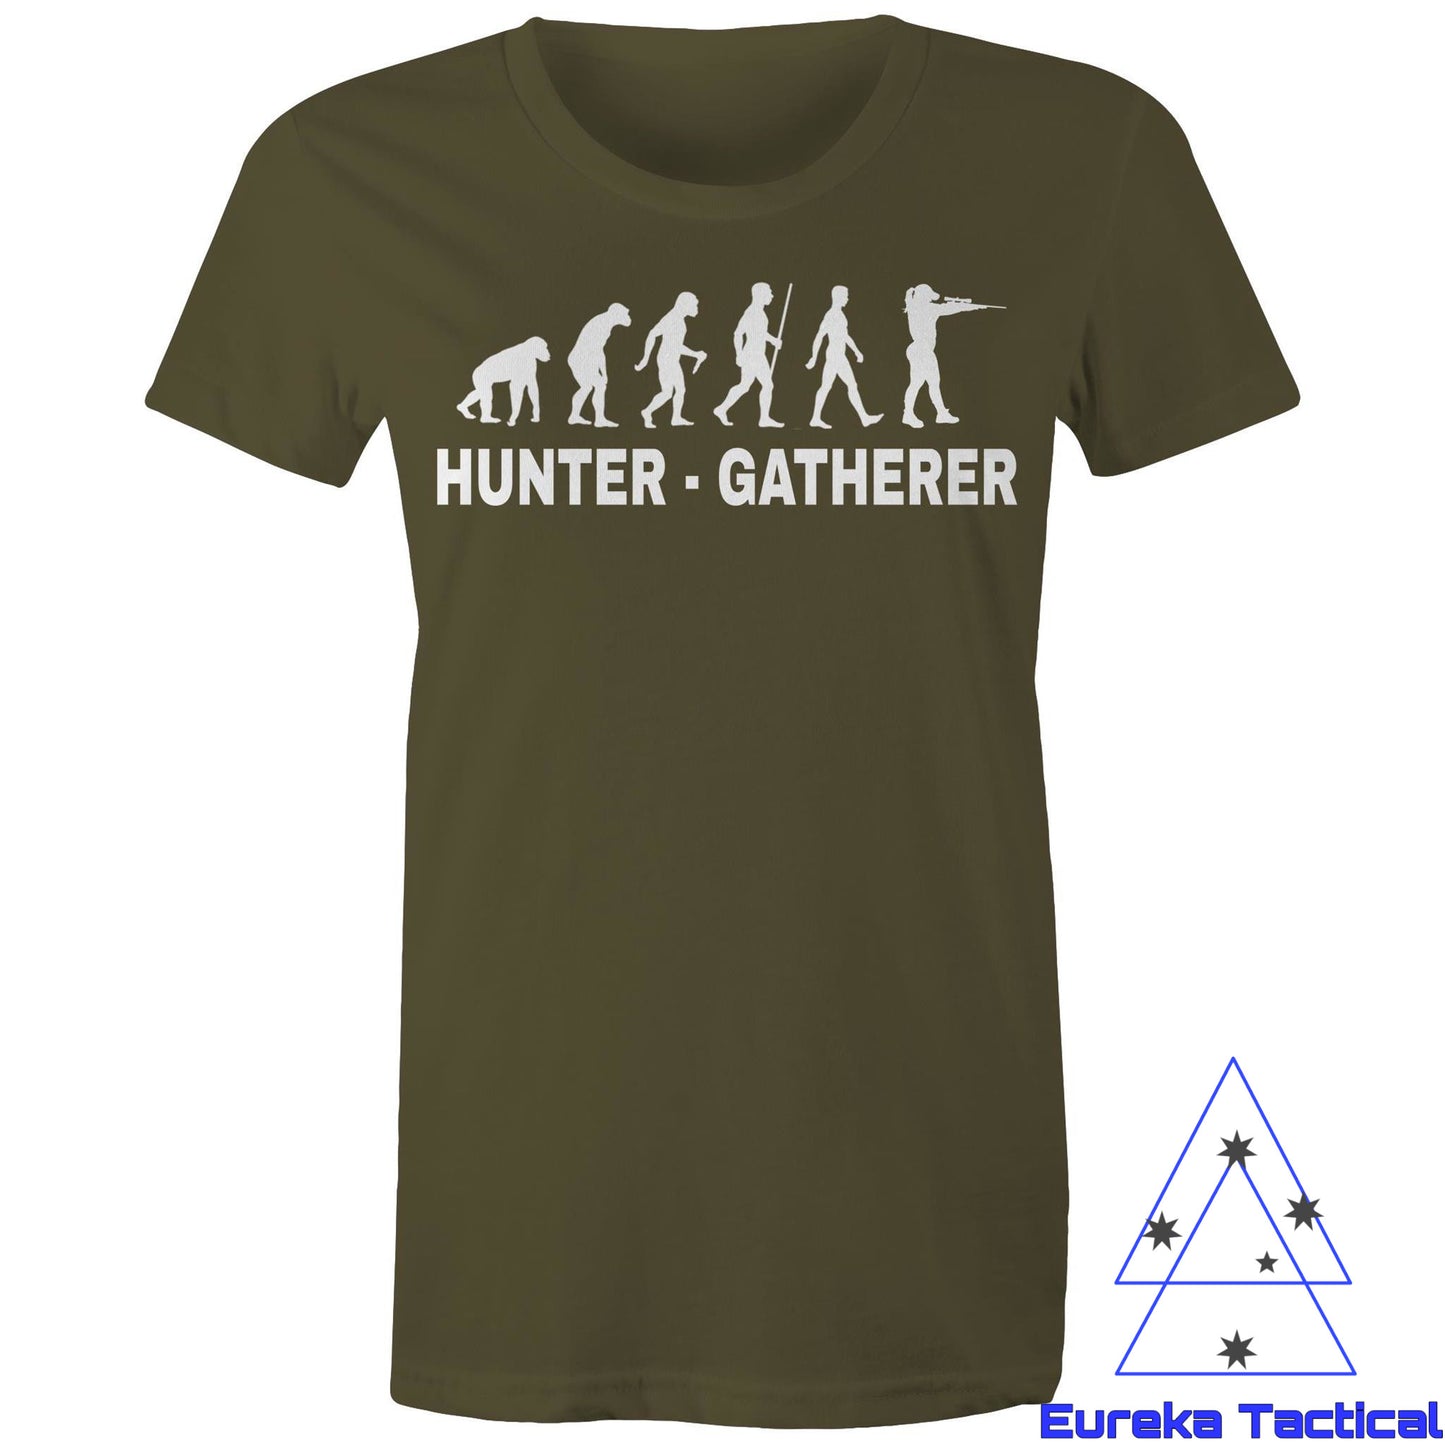 Hunter Gatherer - Firearms. AS Color 100% cotton women's maple tee. Now with female model